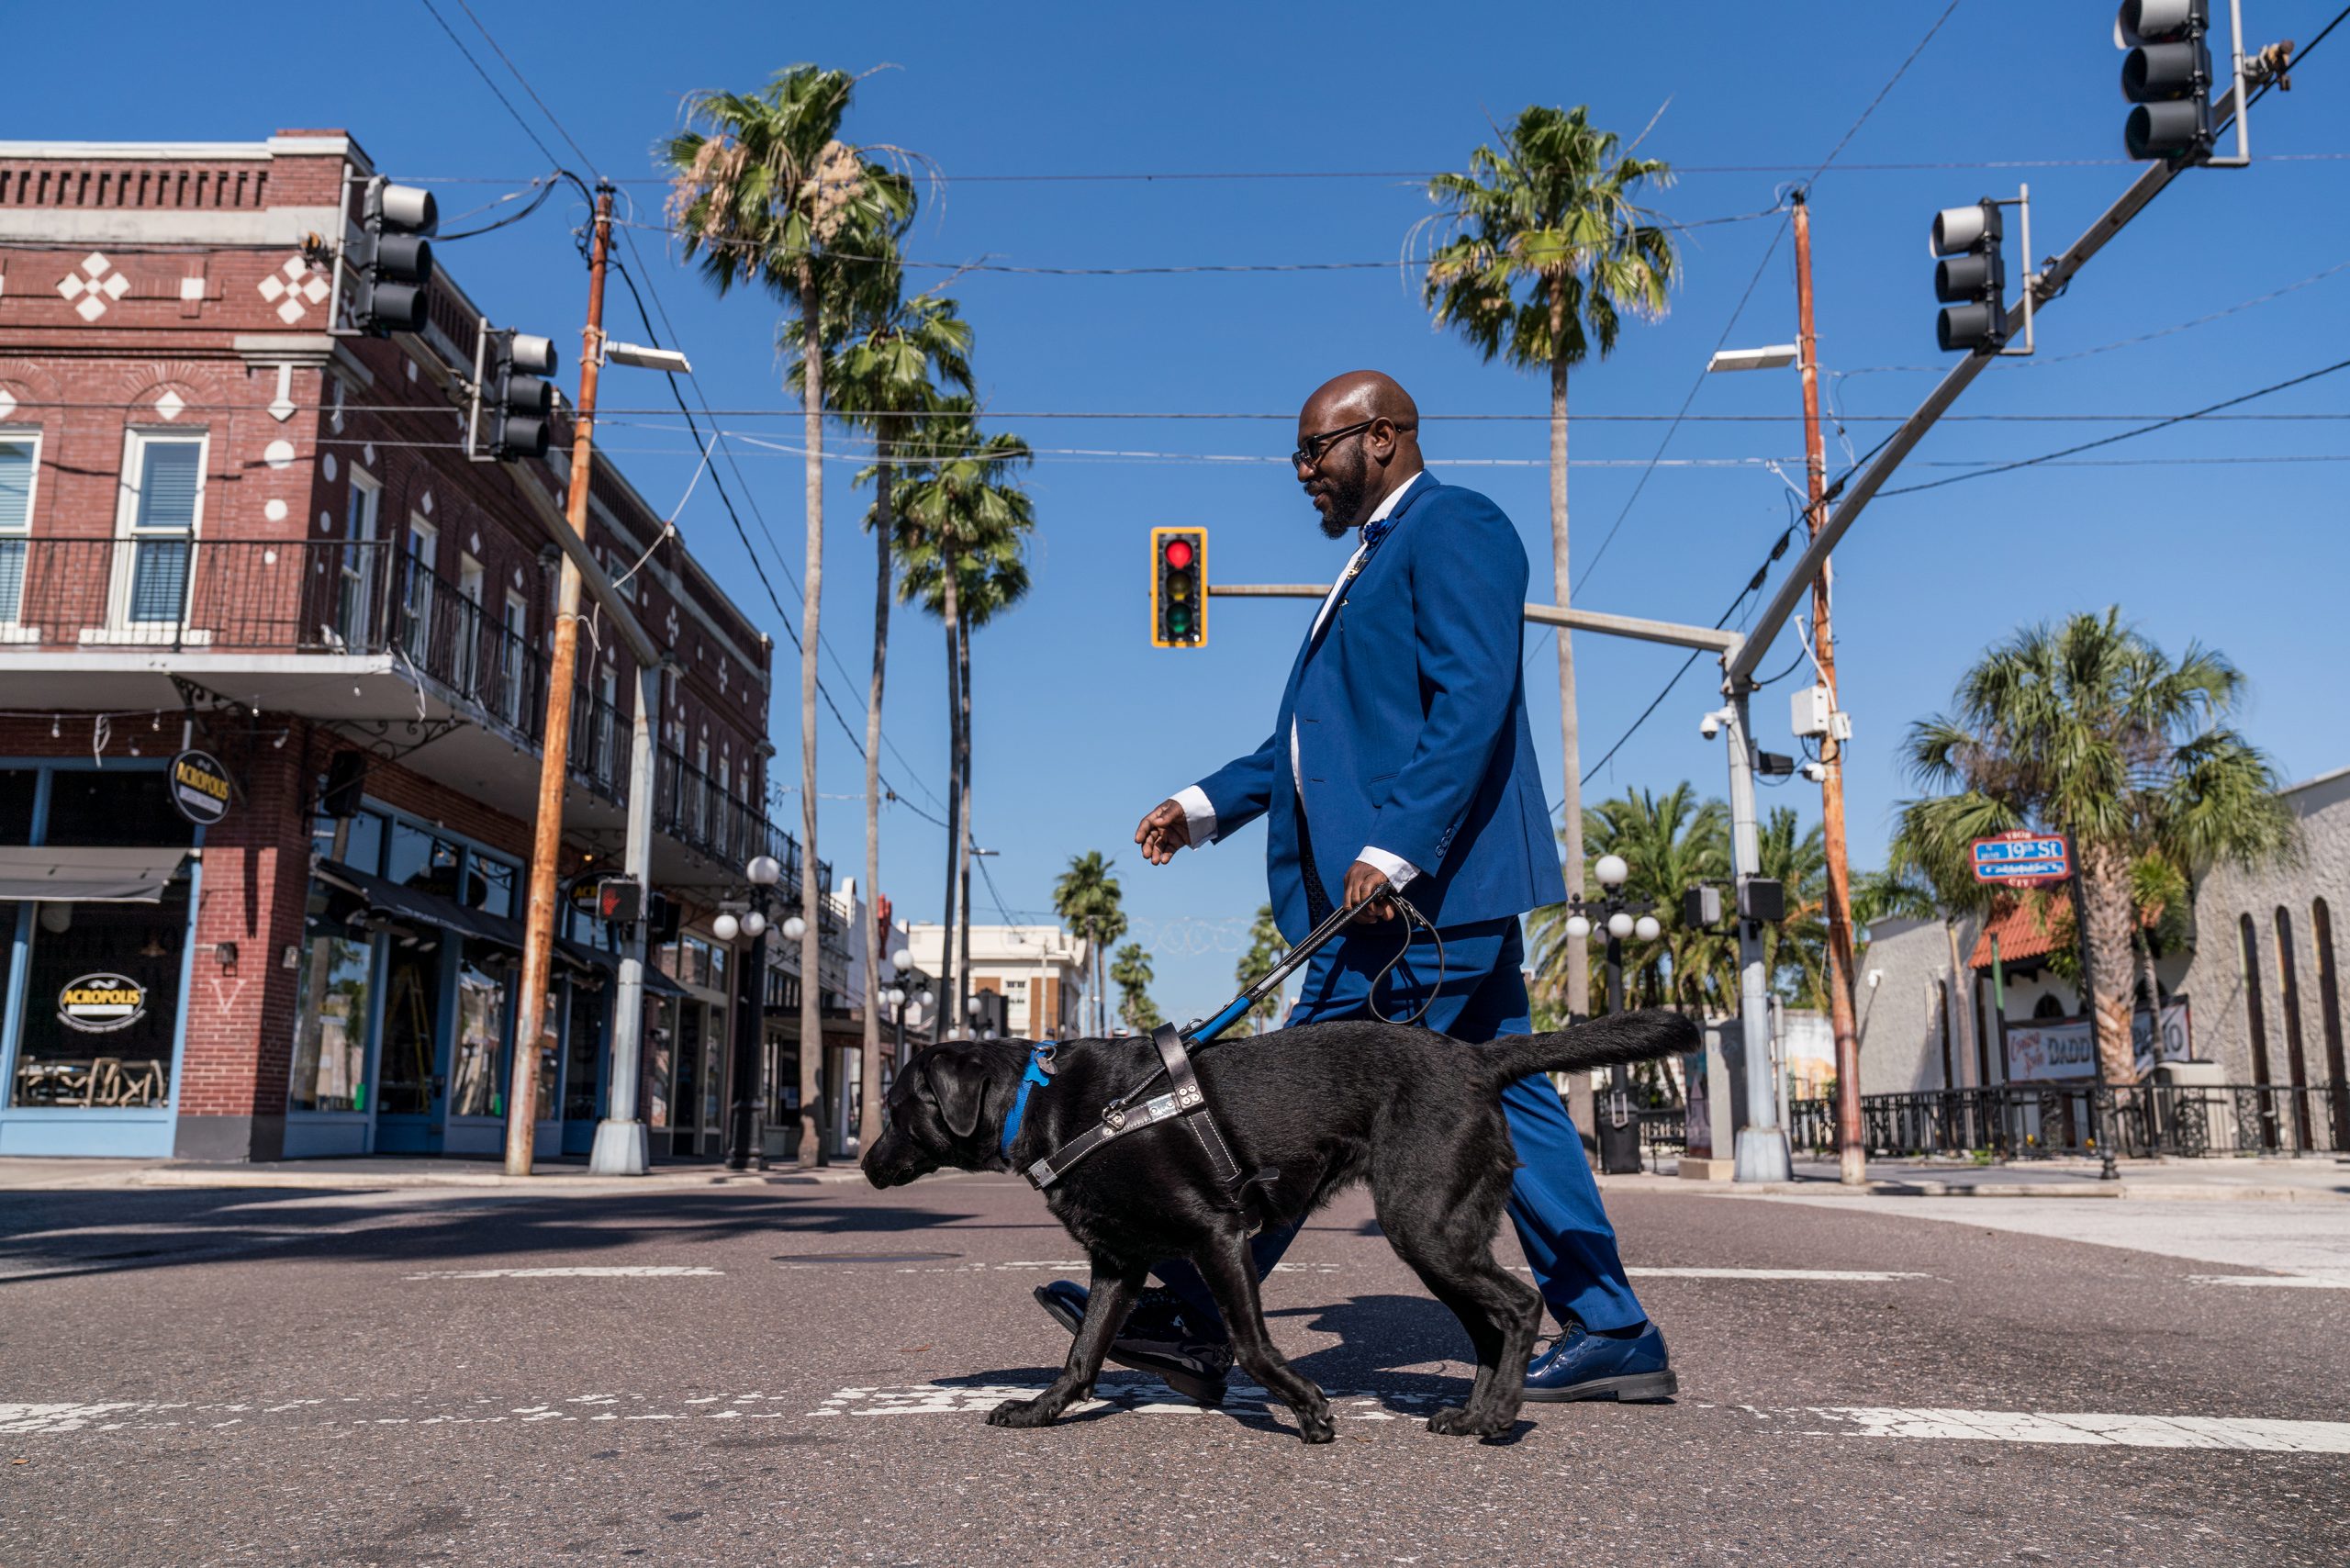 Man in blue suit walks with black guide dog in harness across the street